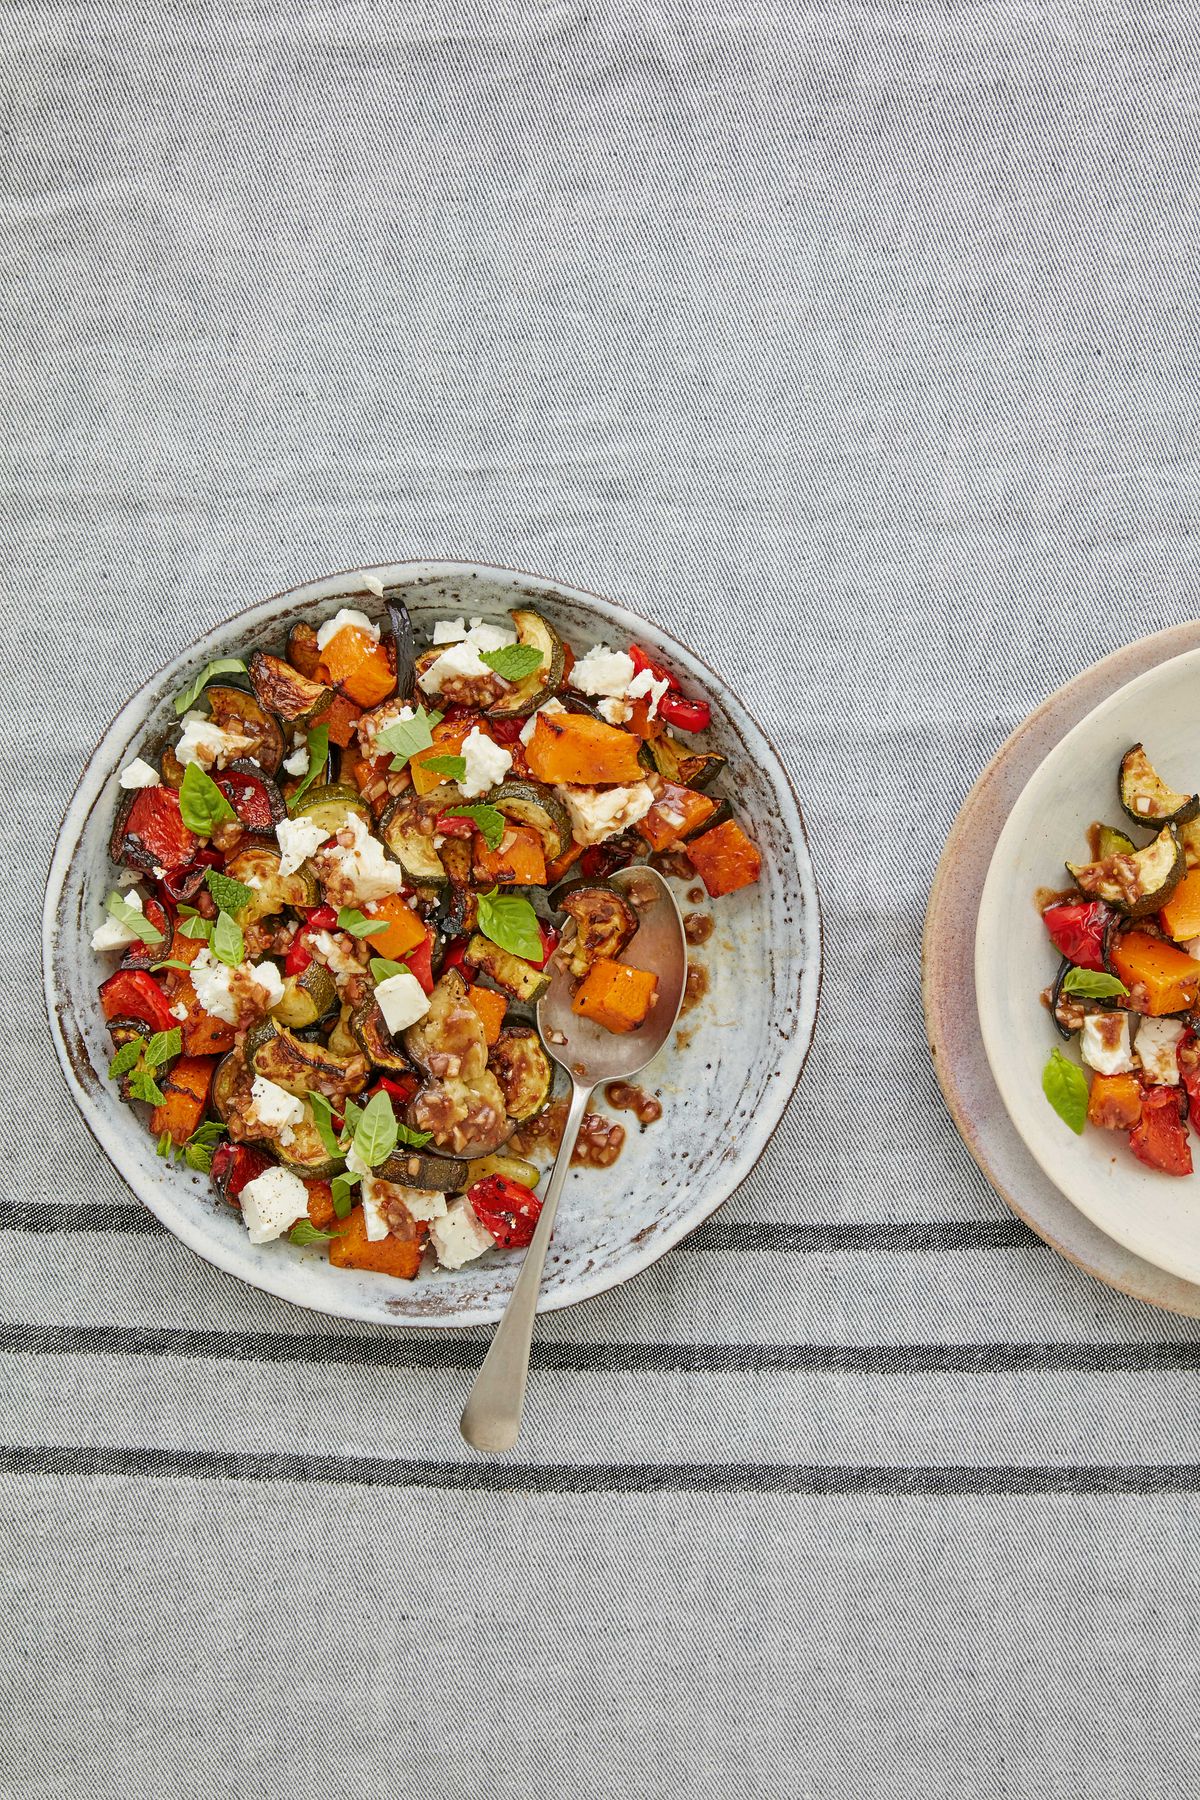 Roasted Vegetables with Feta and Herbs